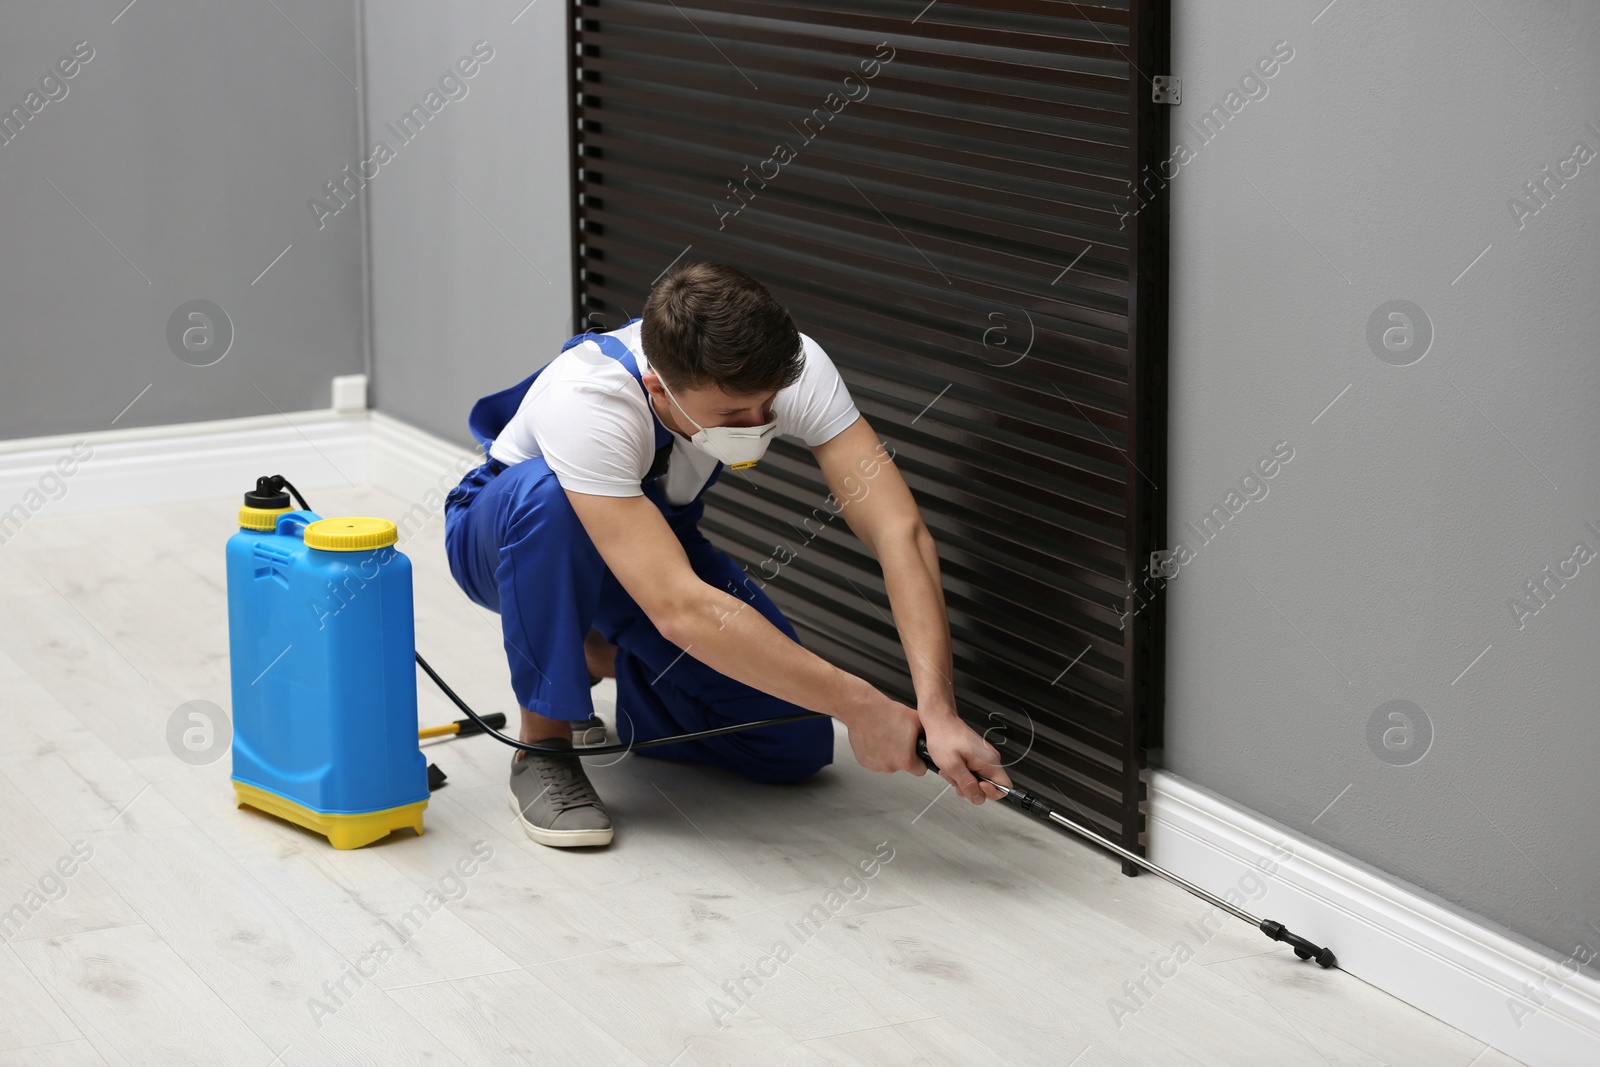 Photo of Pest control worker spraying pesticide in room